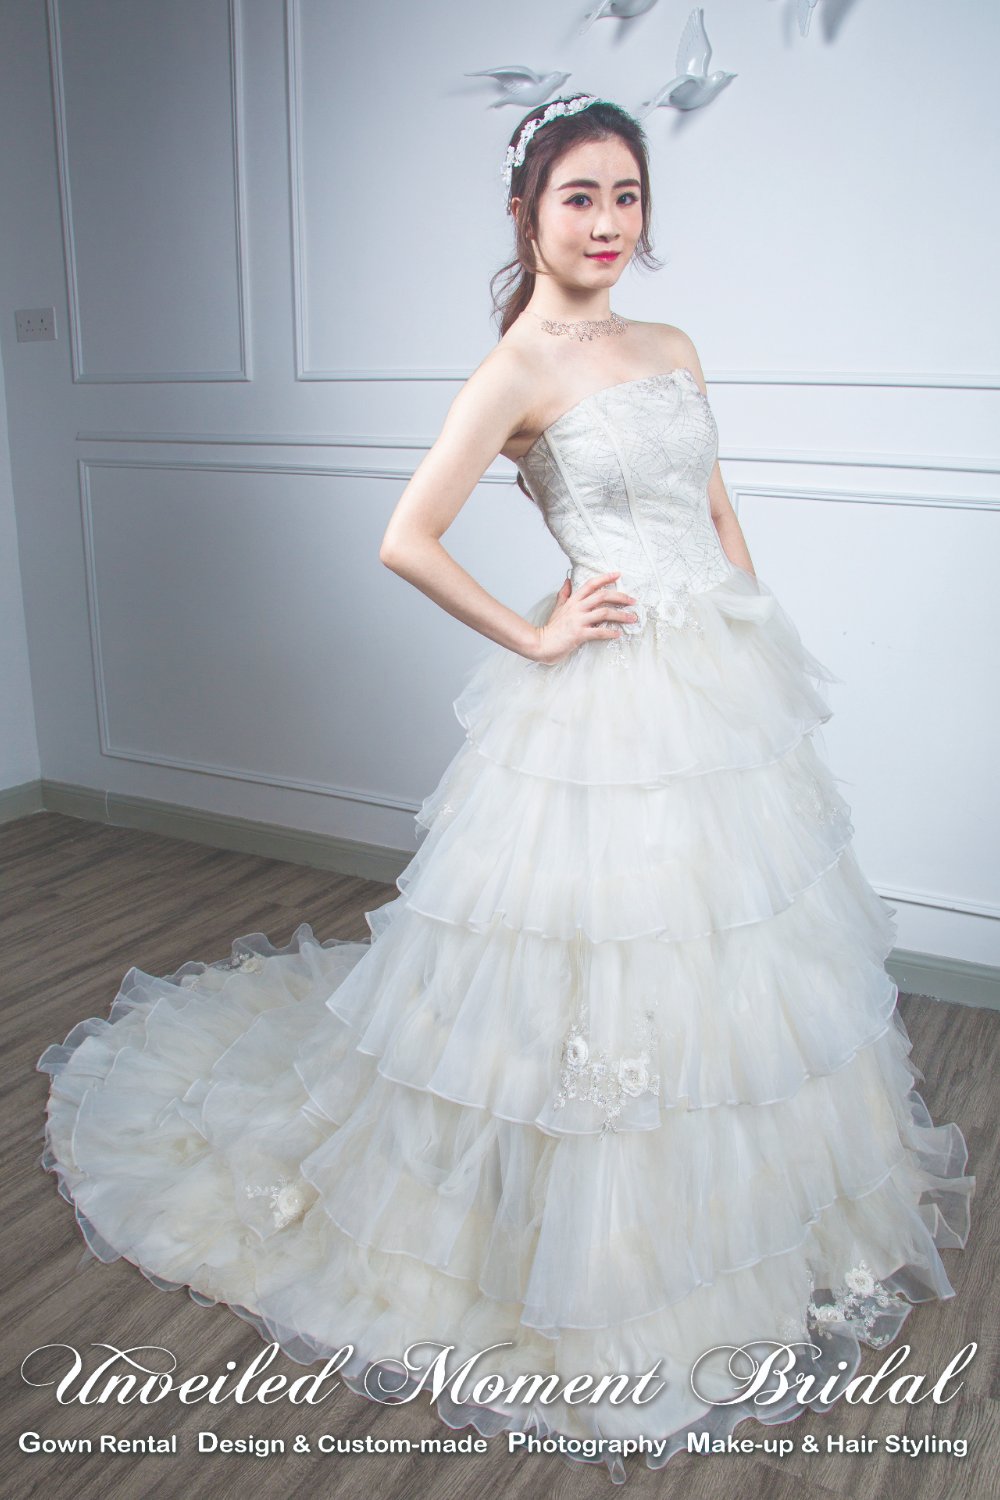 Bride wearing corset-style wedding gown with layers of tulle and lightly beaded organza, and a court train 新娘穿上緊束上身, 多層紗配以釘珠玻璃紗, 小拖尾婚紗